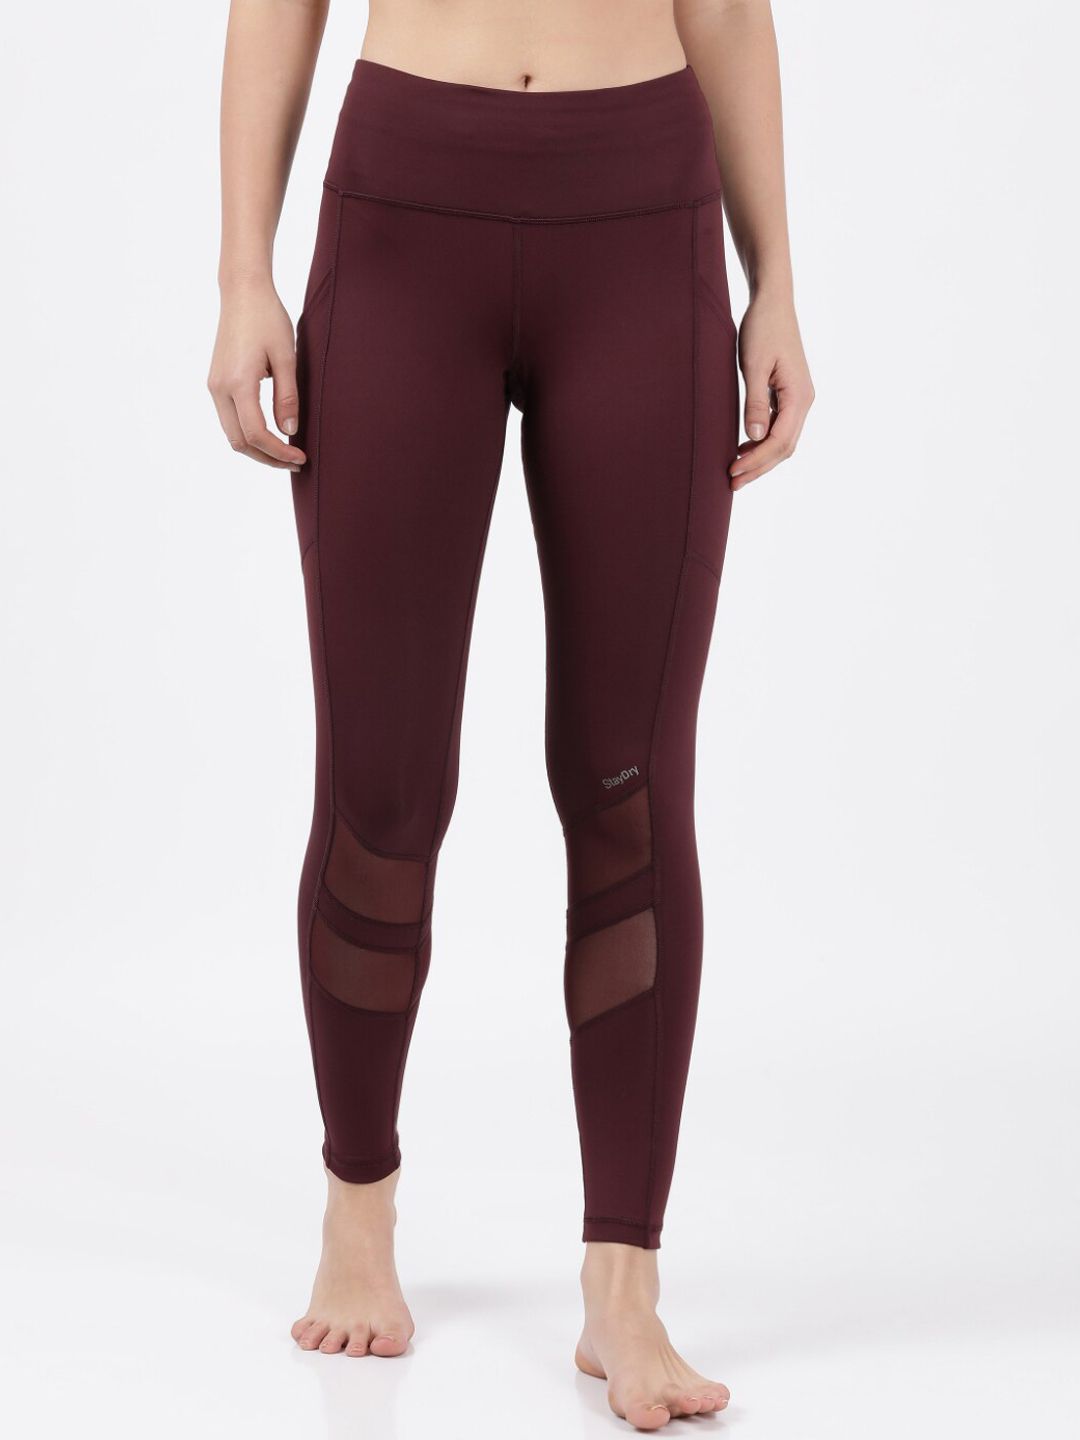 Jockey Women Burgundy Solid Rapid-Dry Anti-Microbial Lounge Pants with Breathable Mesh Price in India